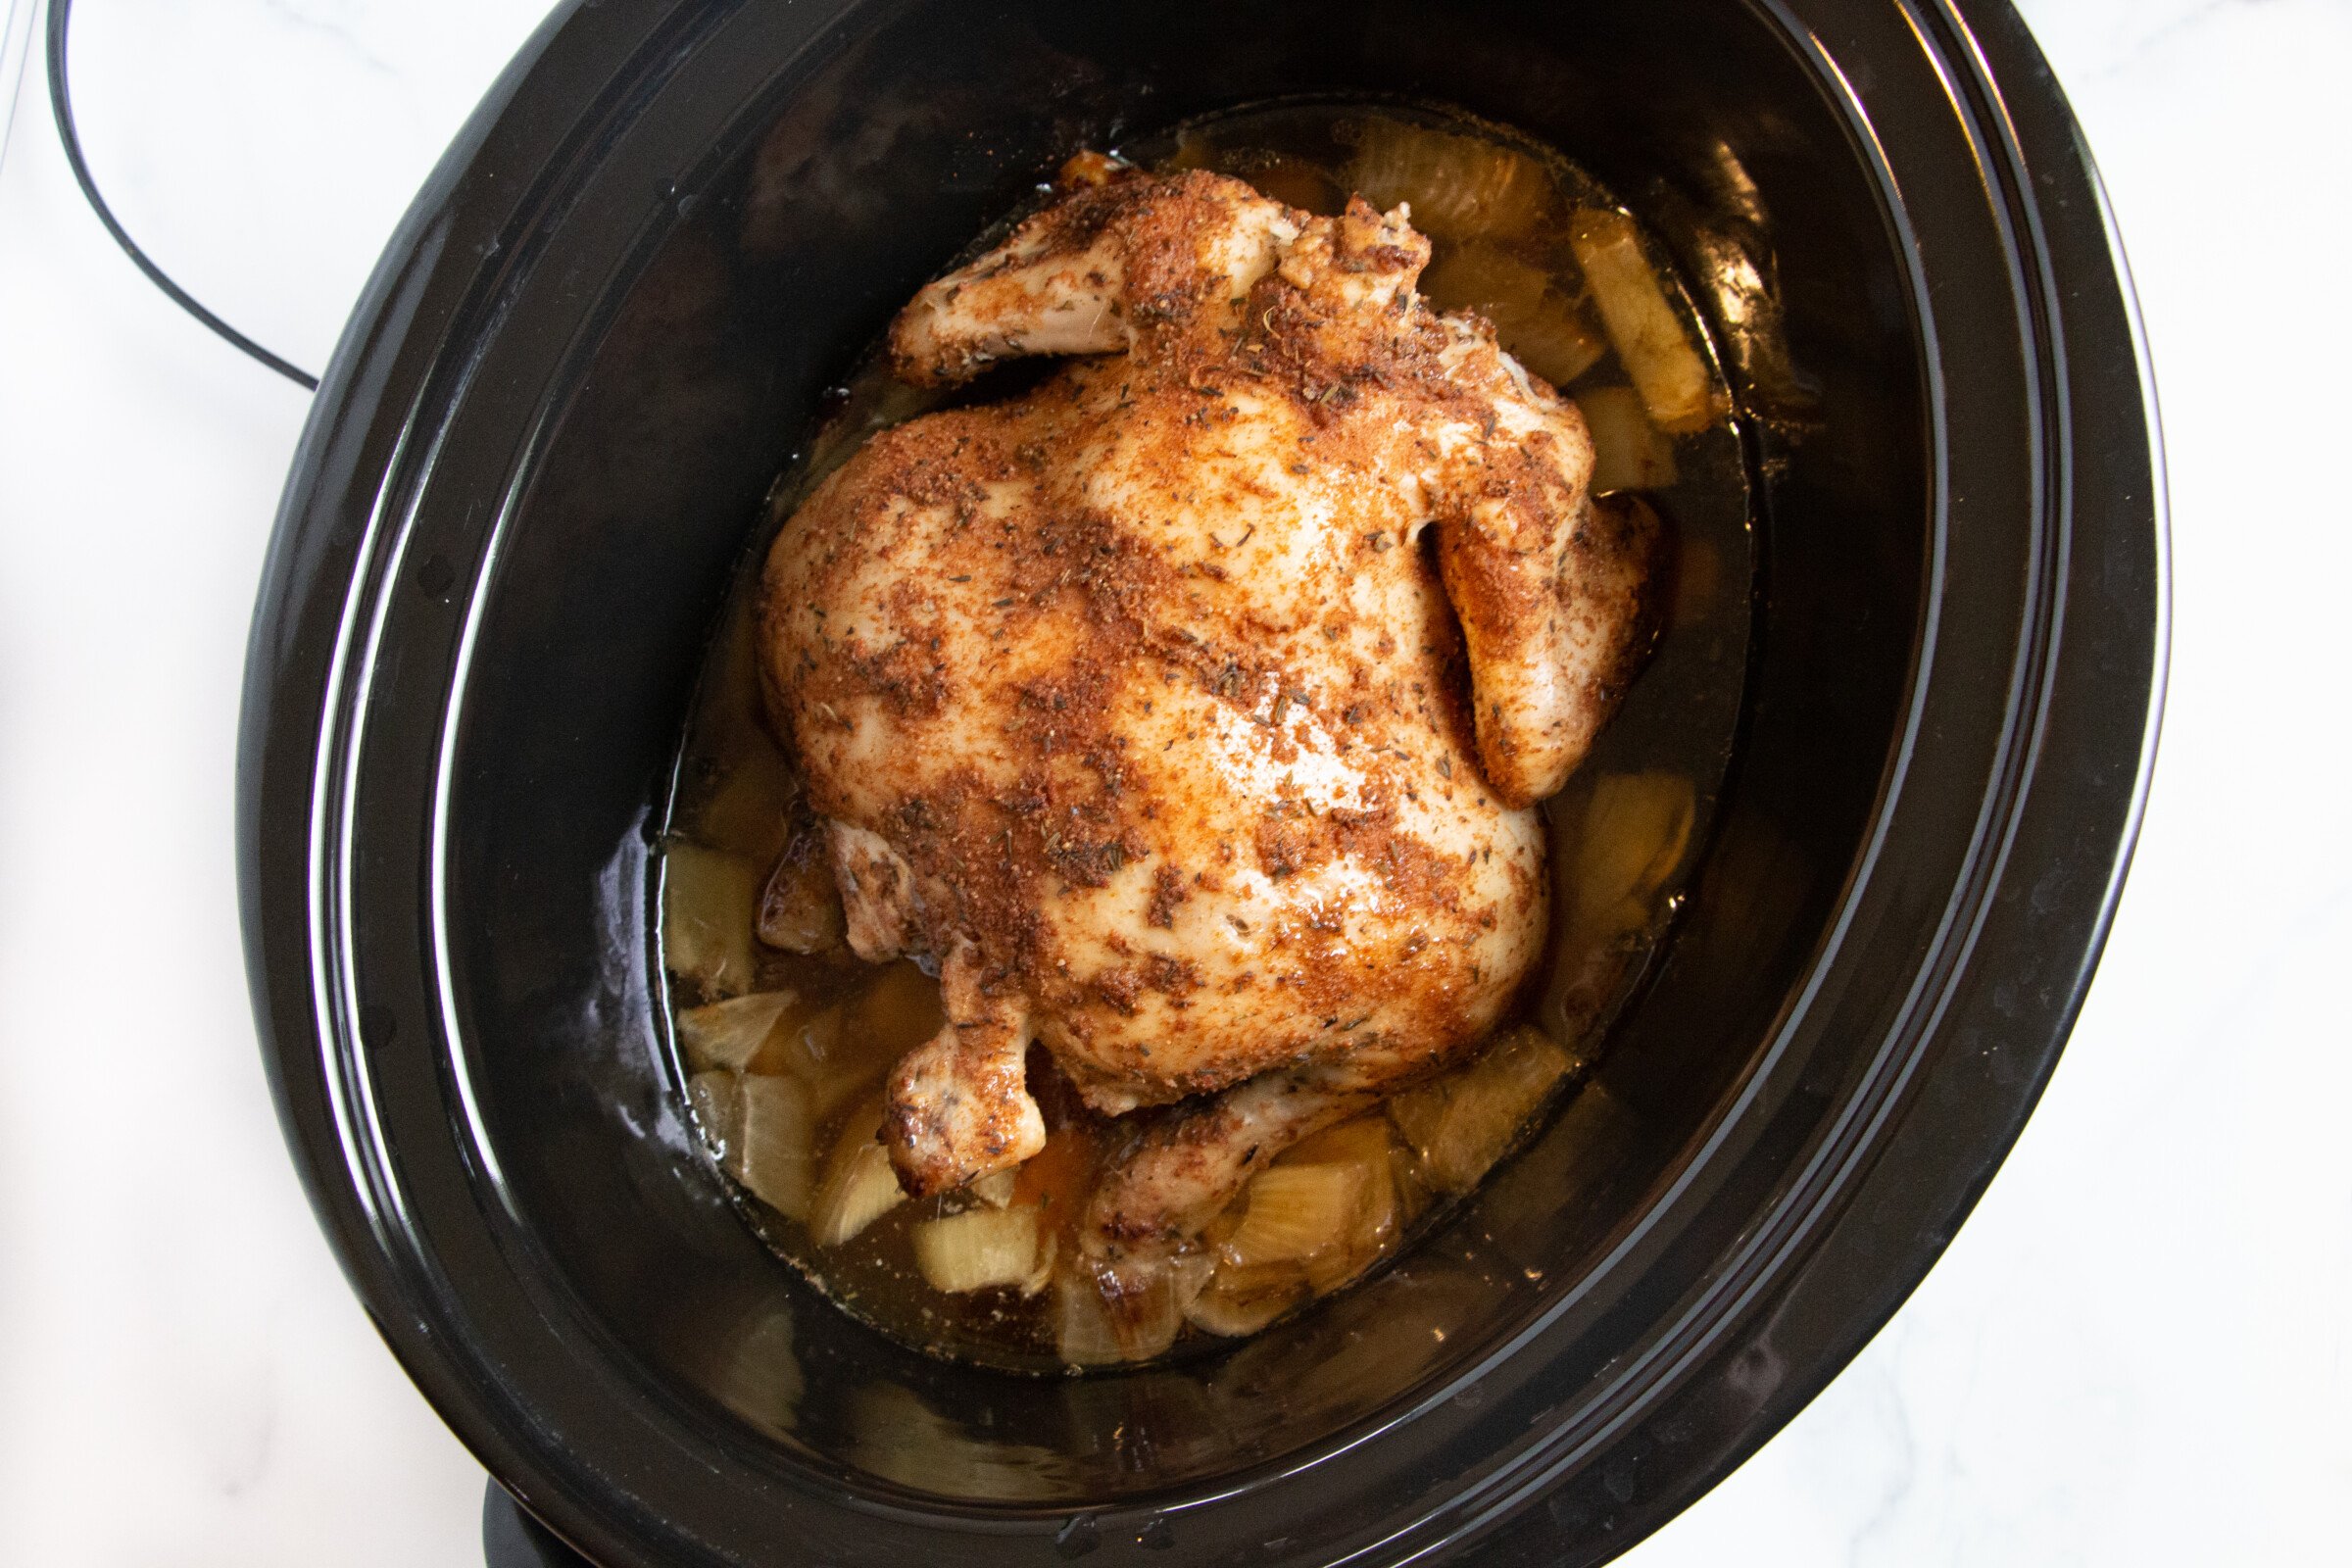 Cooked whole chicken in a crock pot